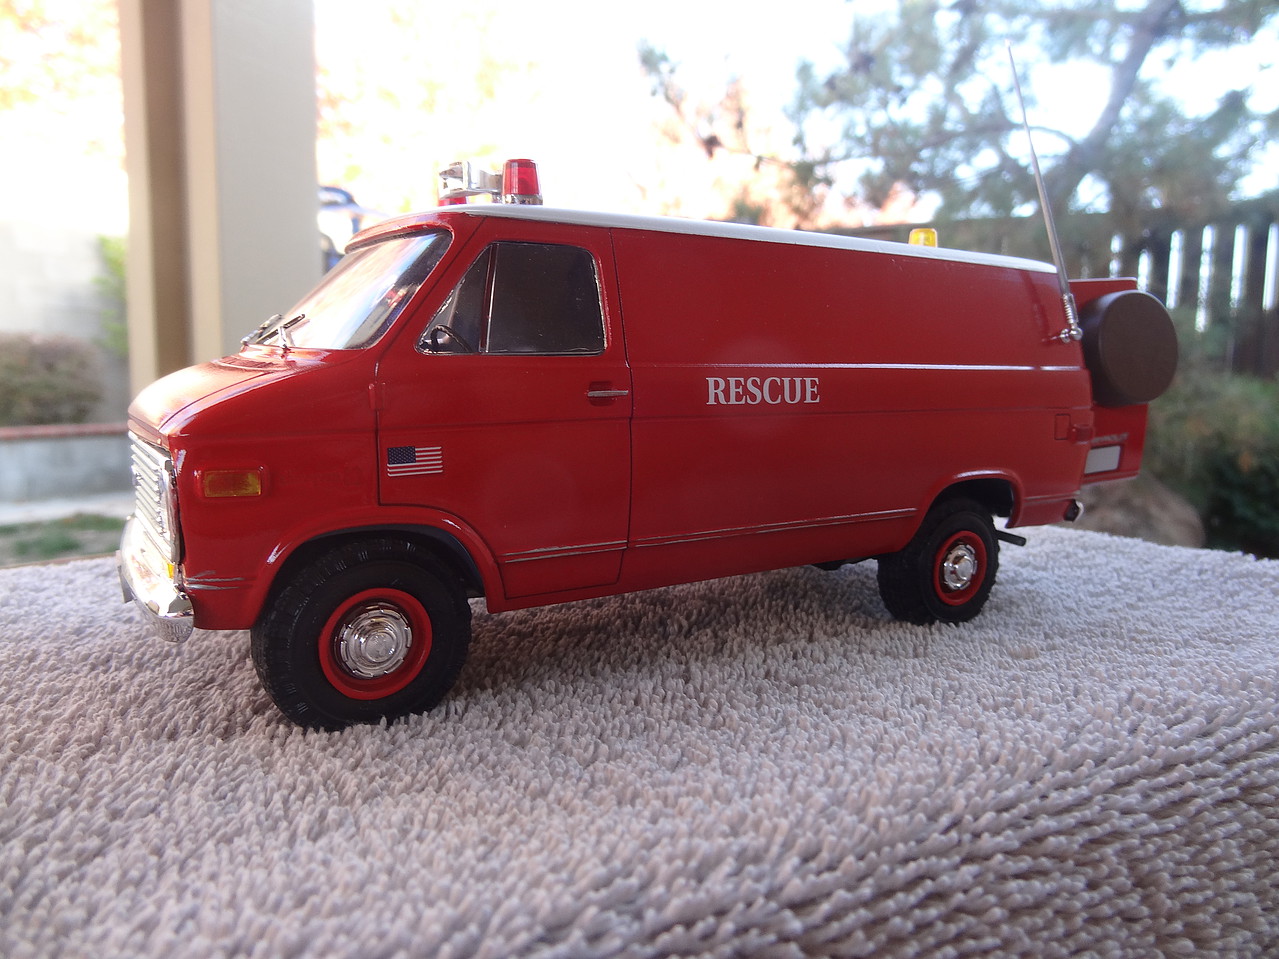 AMT 1:25 Scale Plastic 1975 Chevy Rescue Van Model Kit Red